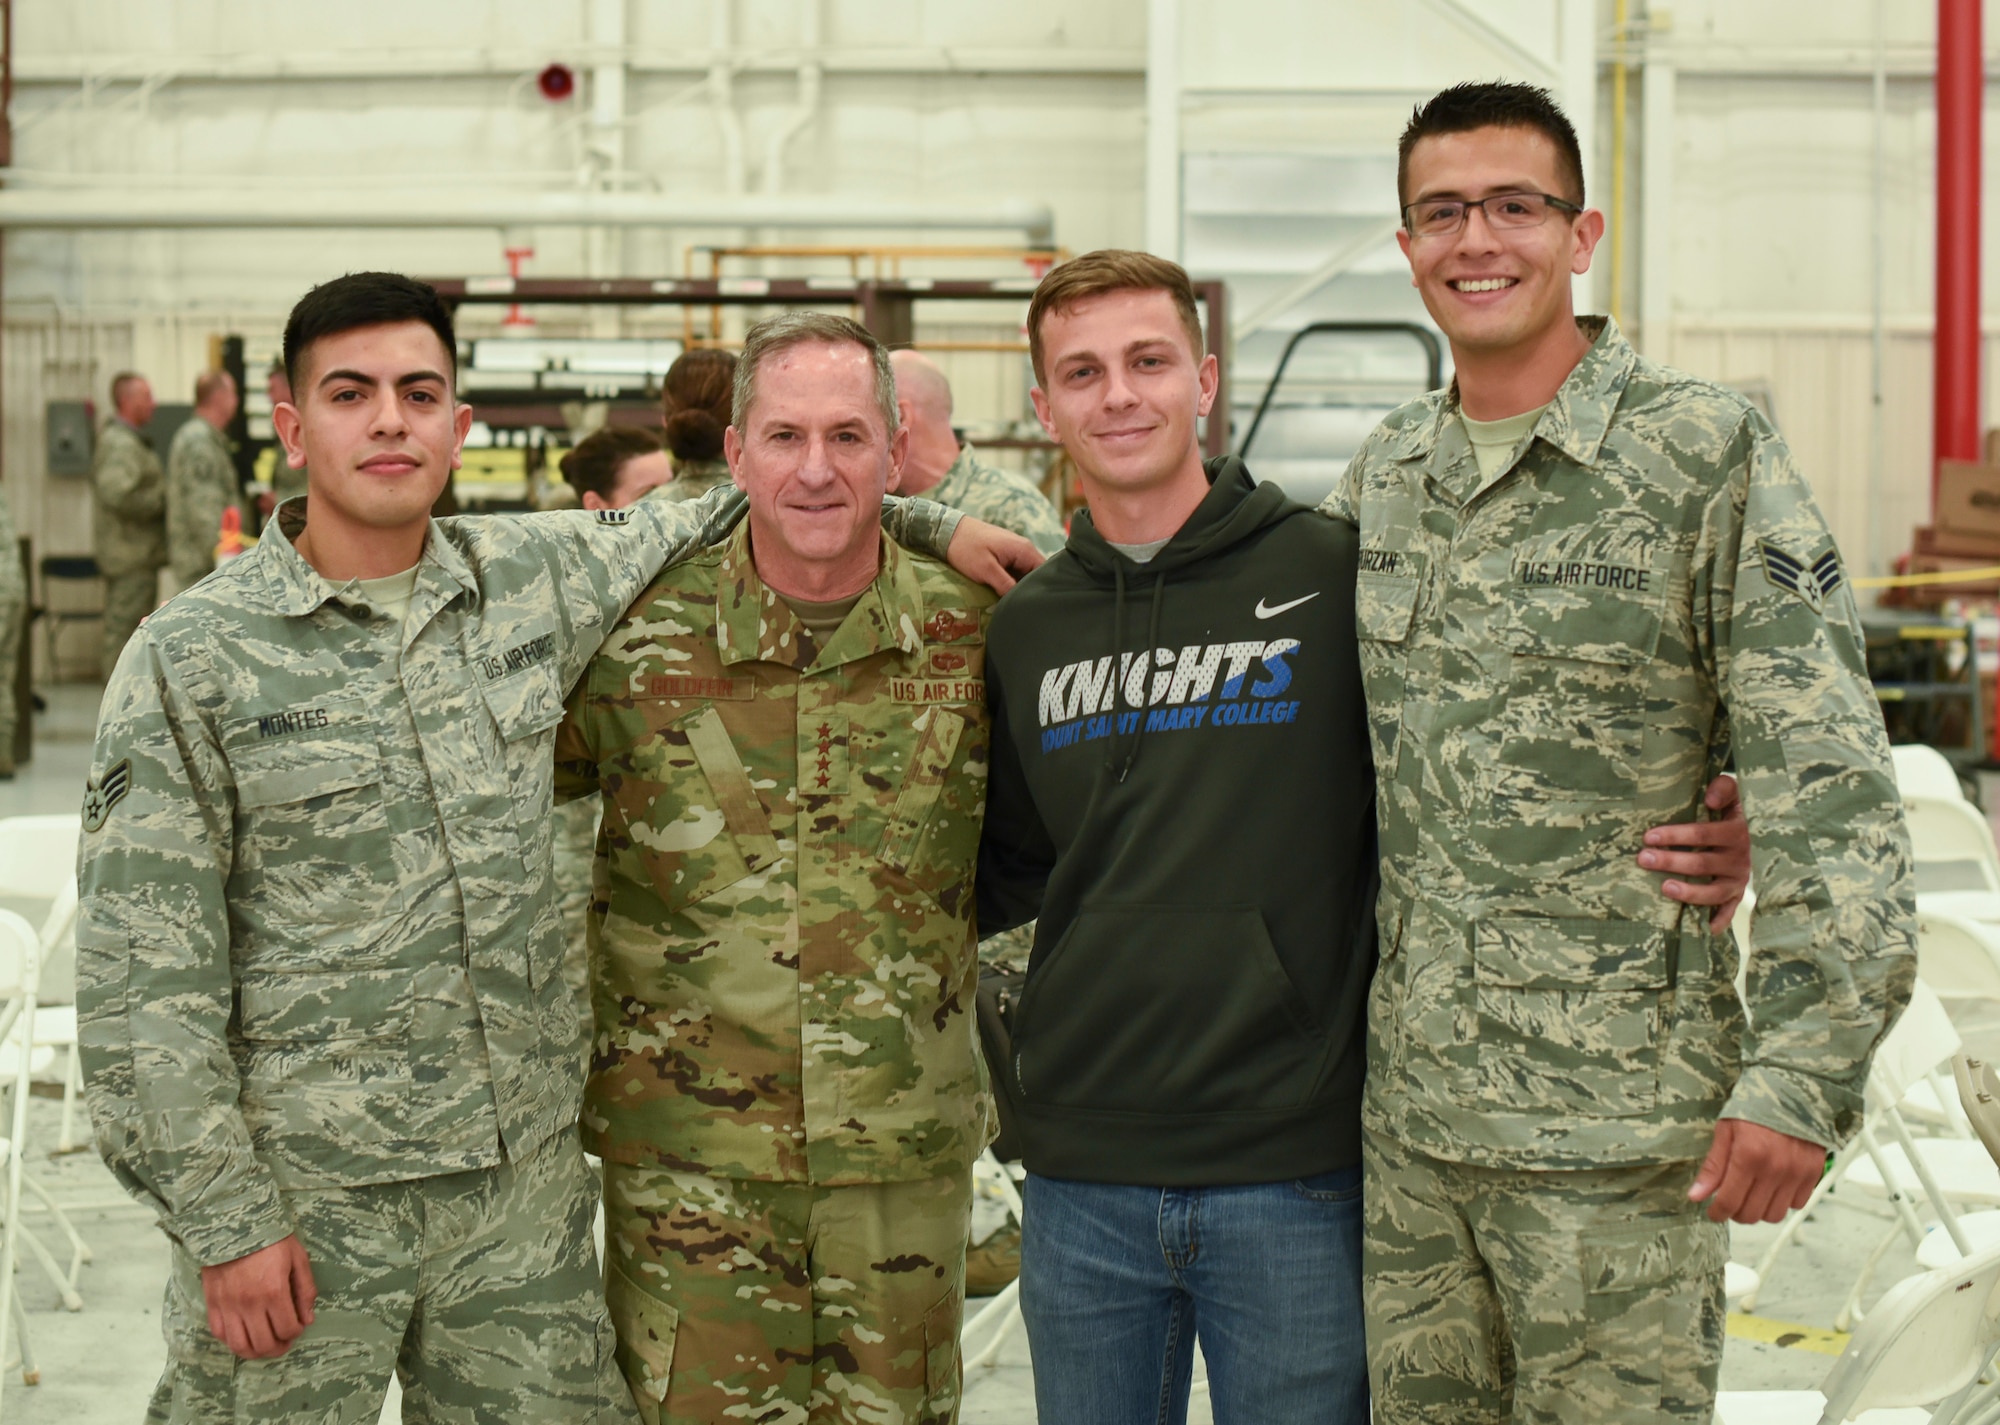 Air Force Chief of Staff Gen. David L. Goldfein visits with Reserve Citizen Airmen and their families during the 301st Fighter Wing’s annual Family Day, Oct. 13, 2018, at Naval Air Station Fort Worth Joint Reserve Base, Texas. This event is held annually to thank families and friends for their support to the wing. Along with the games, the event offered food, prize giveaways and resources for military families. (U.S. Air Force photo by Tech. Sgt. Charles Taylor)